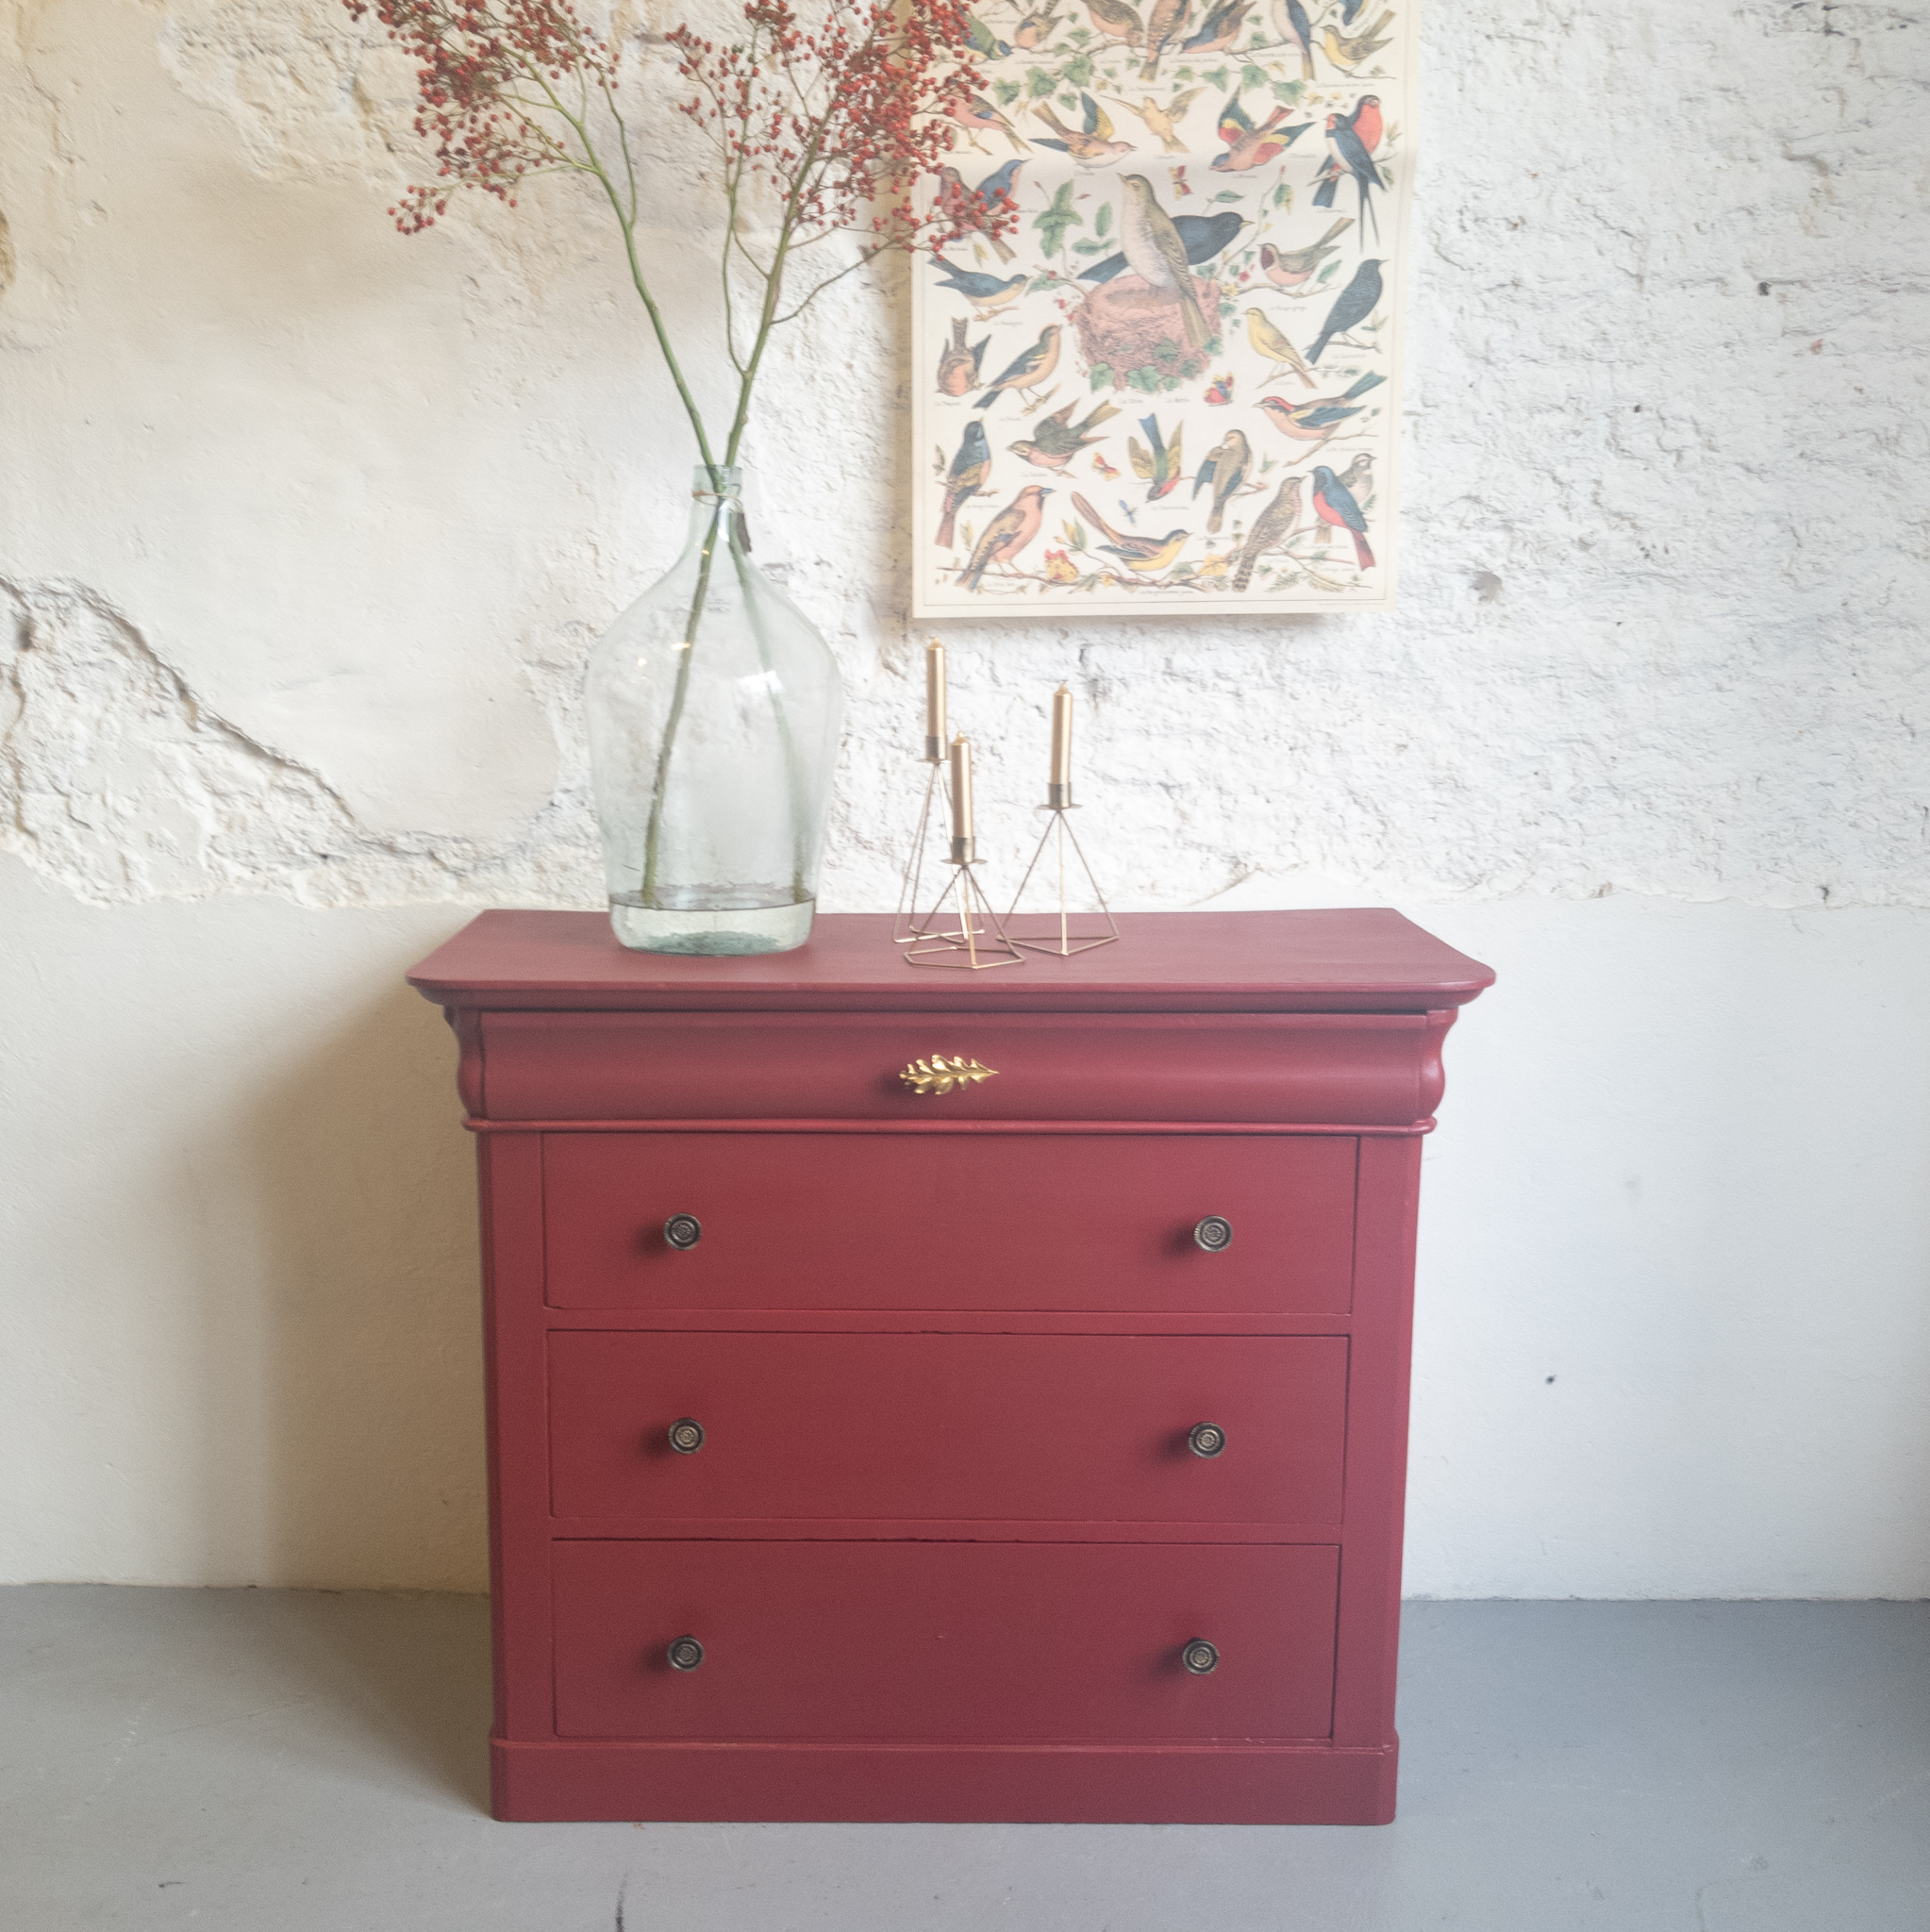 Dressoir Cranberry rood met gouden knoppen fusion mineral paint Goed Gestyled Brielle